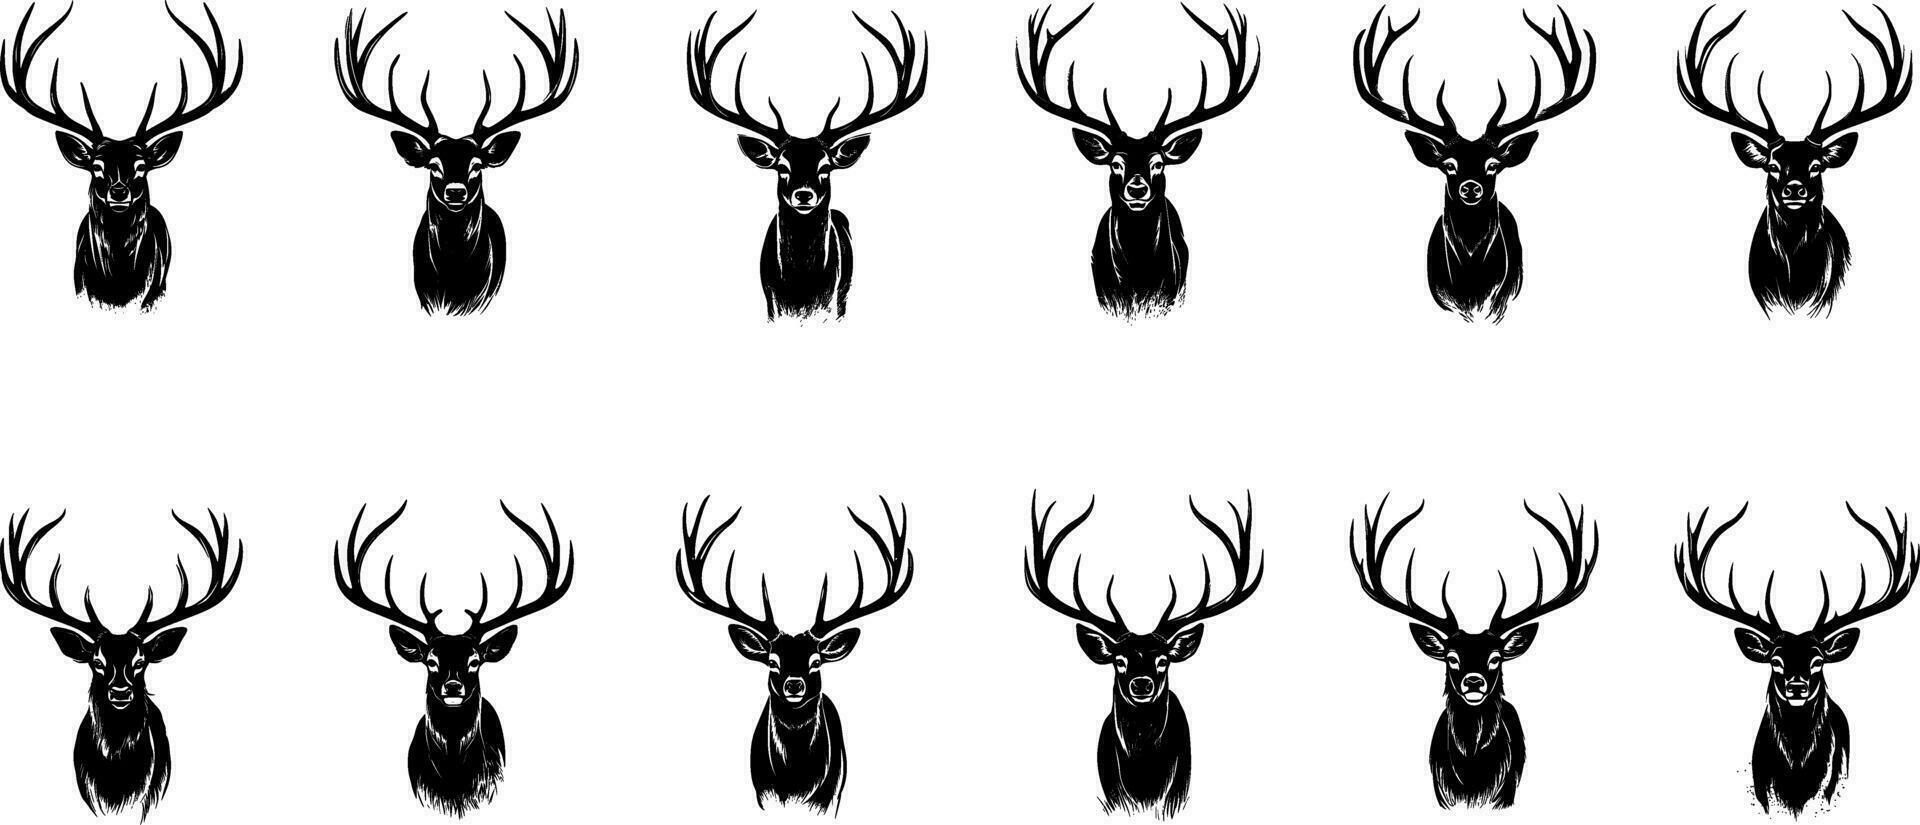 Deer vector set on a white background